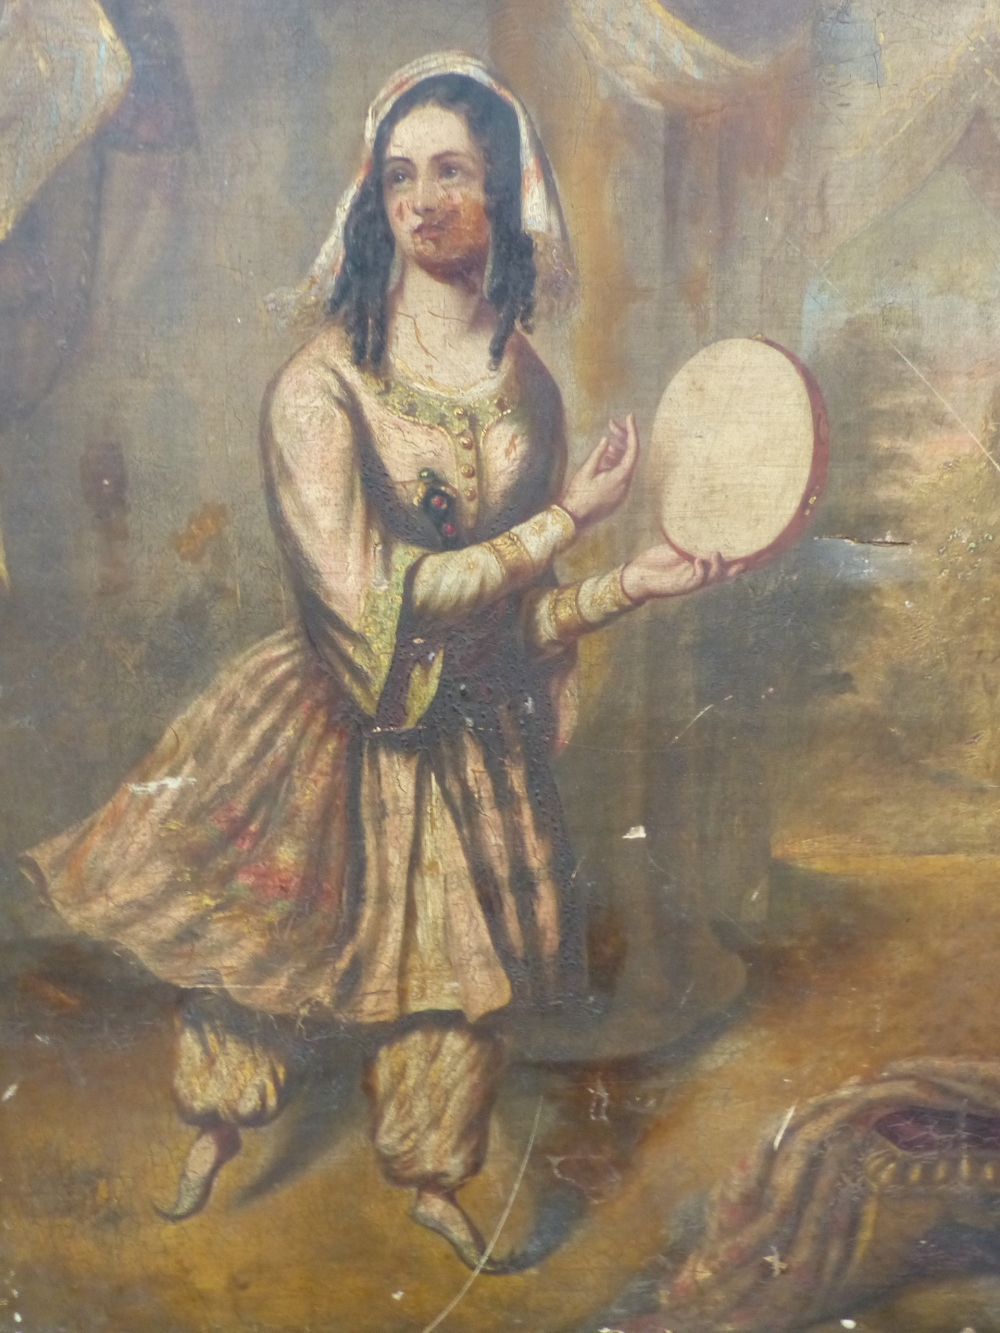 19TH CENTURY ORIENTALIST SCHOOL. PORTRAIT OF AN EASTERN YOUNG LADY HOLDING A TAMBOURINE. OIL ON CANVAS. 76 X 64CM by Orientalist School, 19TH CENTURY